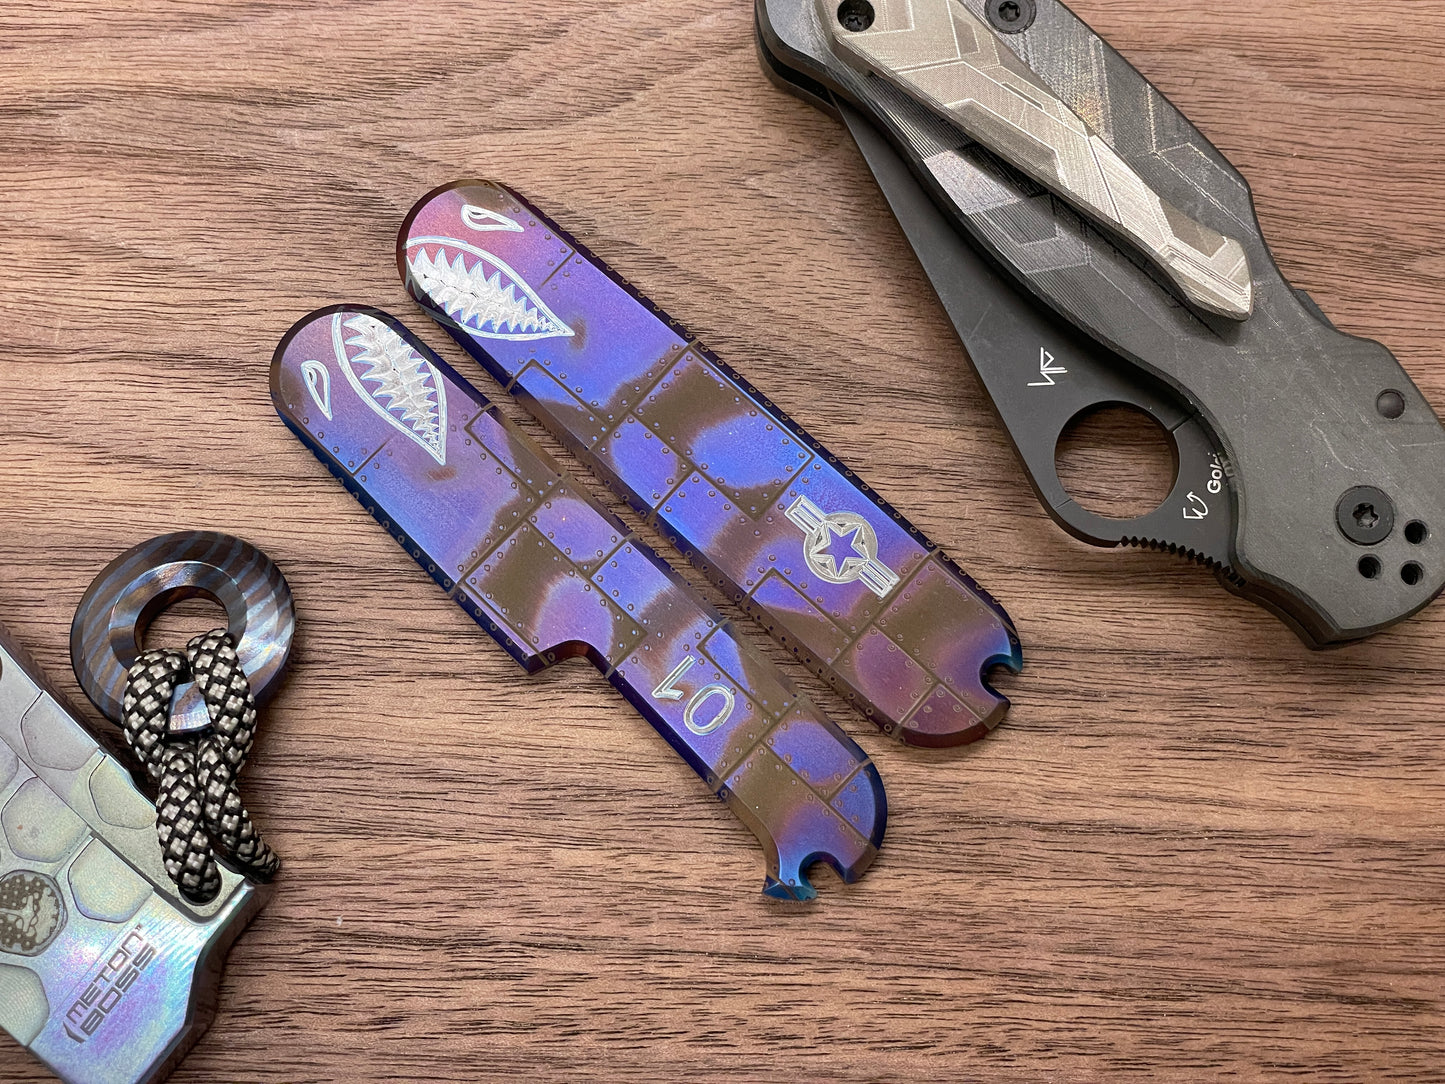 P40 Riveted Flamed 91mm Titanium Scales for Swiss Army SAK